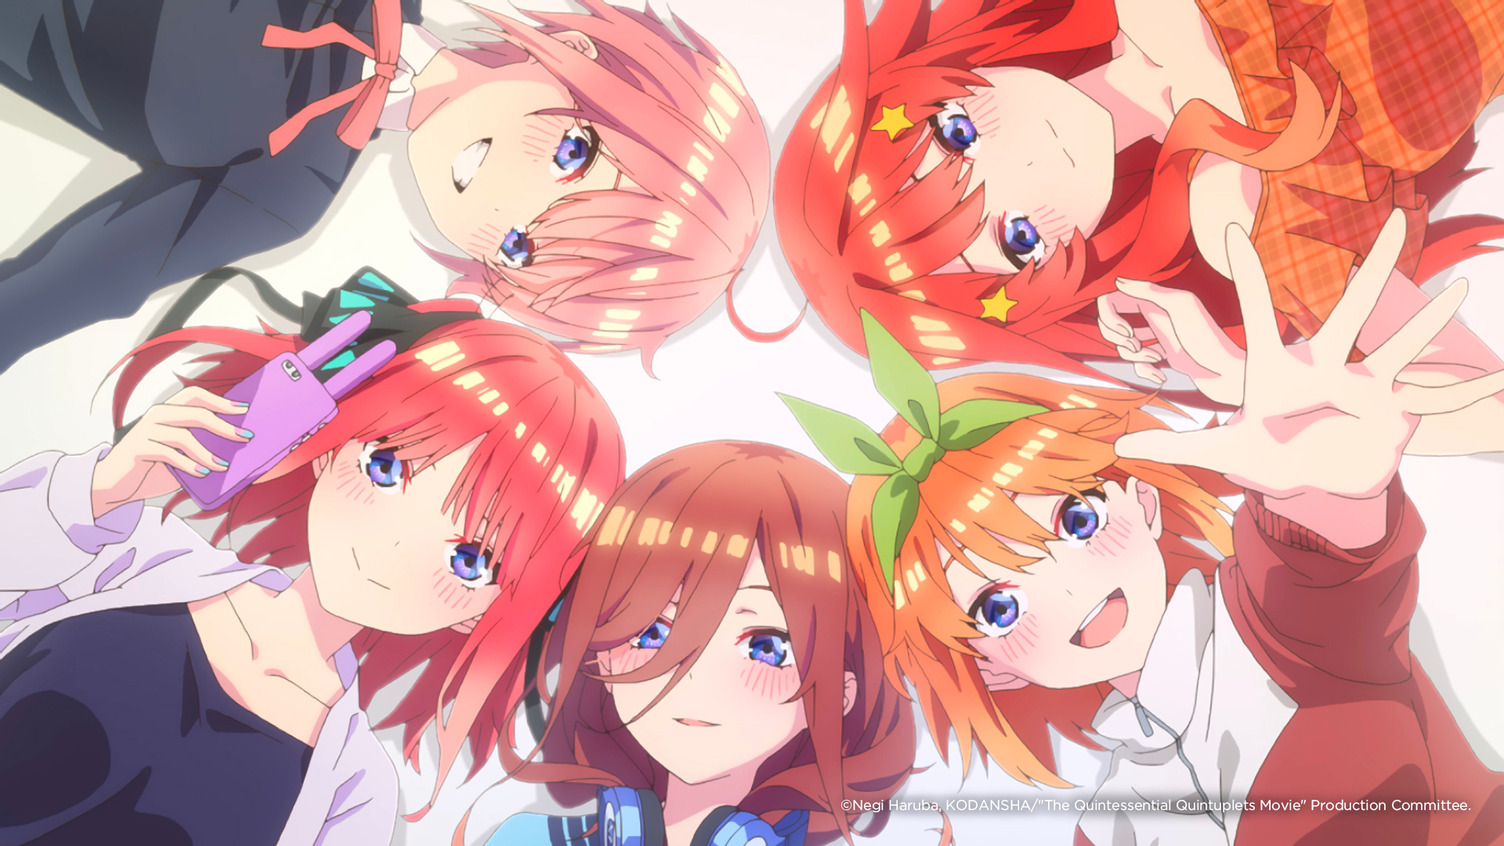 FEATURE: What Would the Nakano Sisters Have on Their Wedding Registries in The Quintessential Quintuplets?